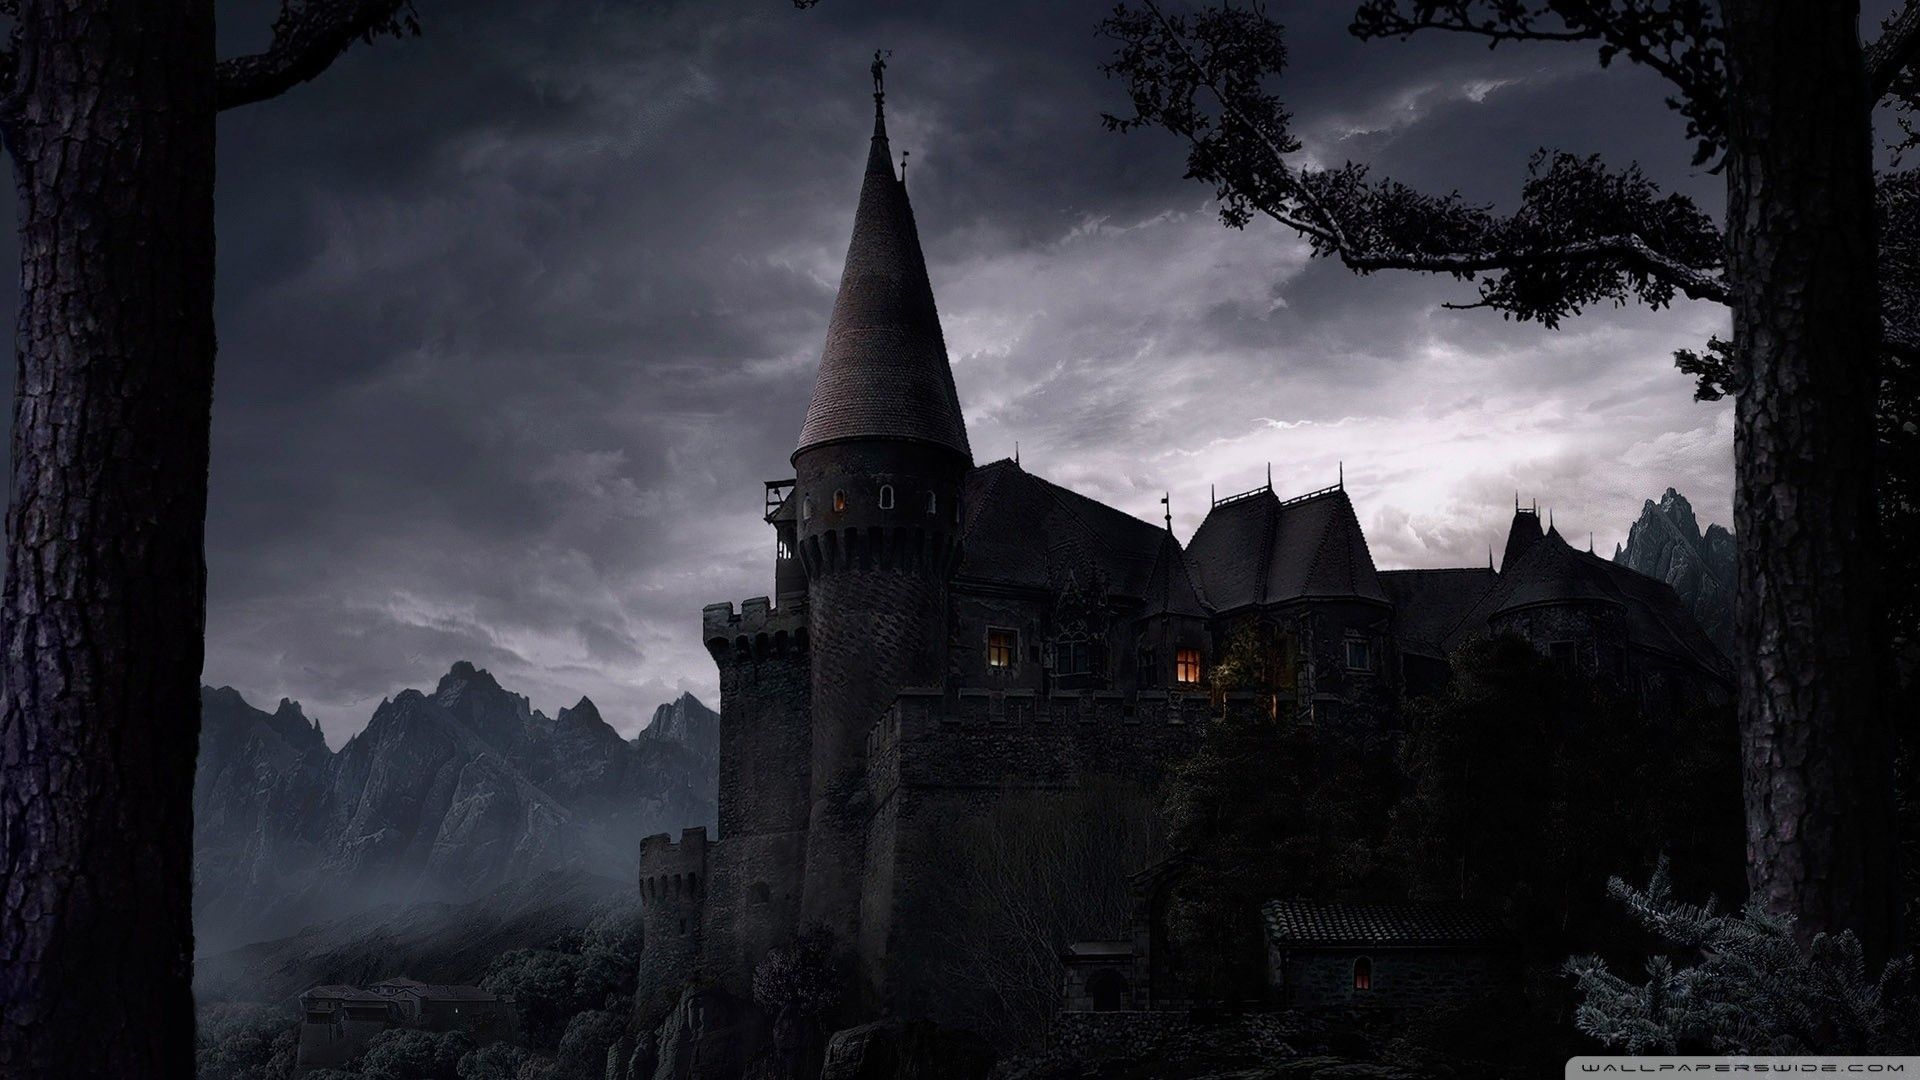 Gothic castle in the forest wallpaper 1920x1080 - Castle